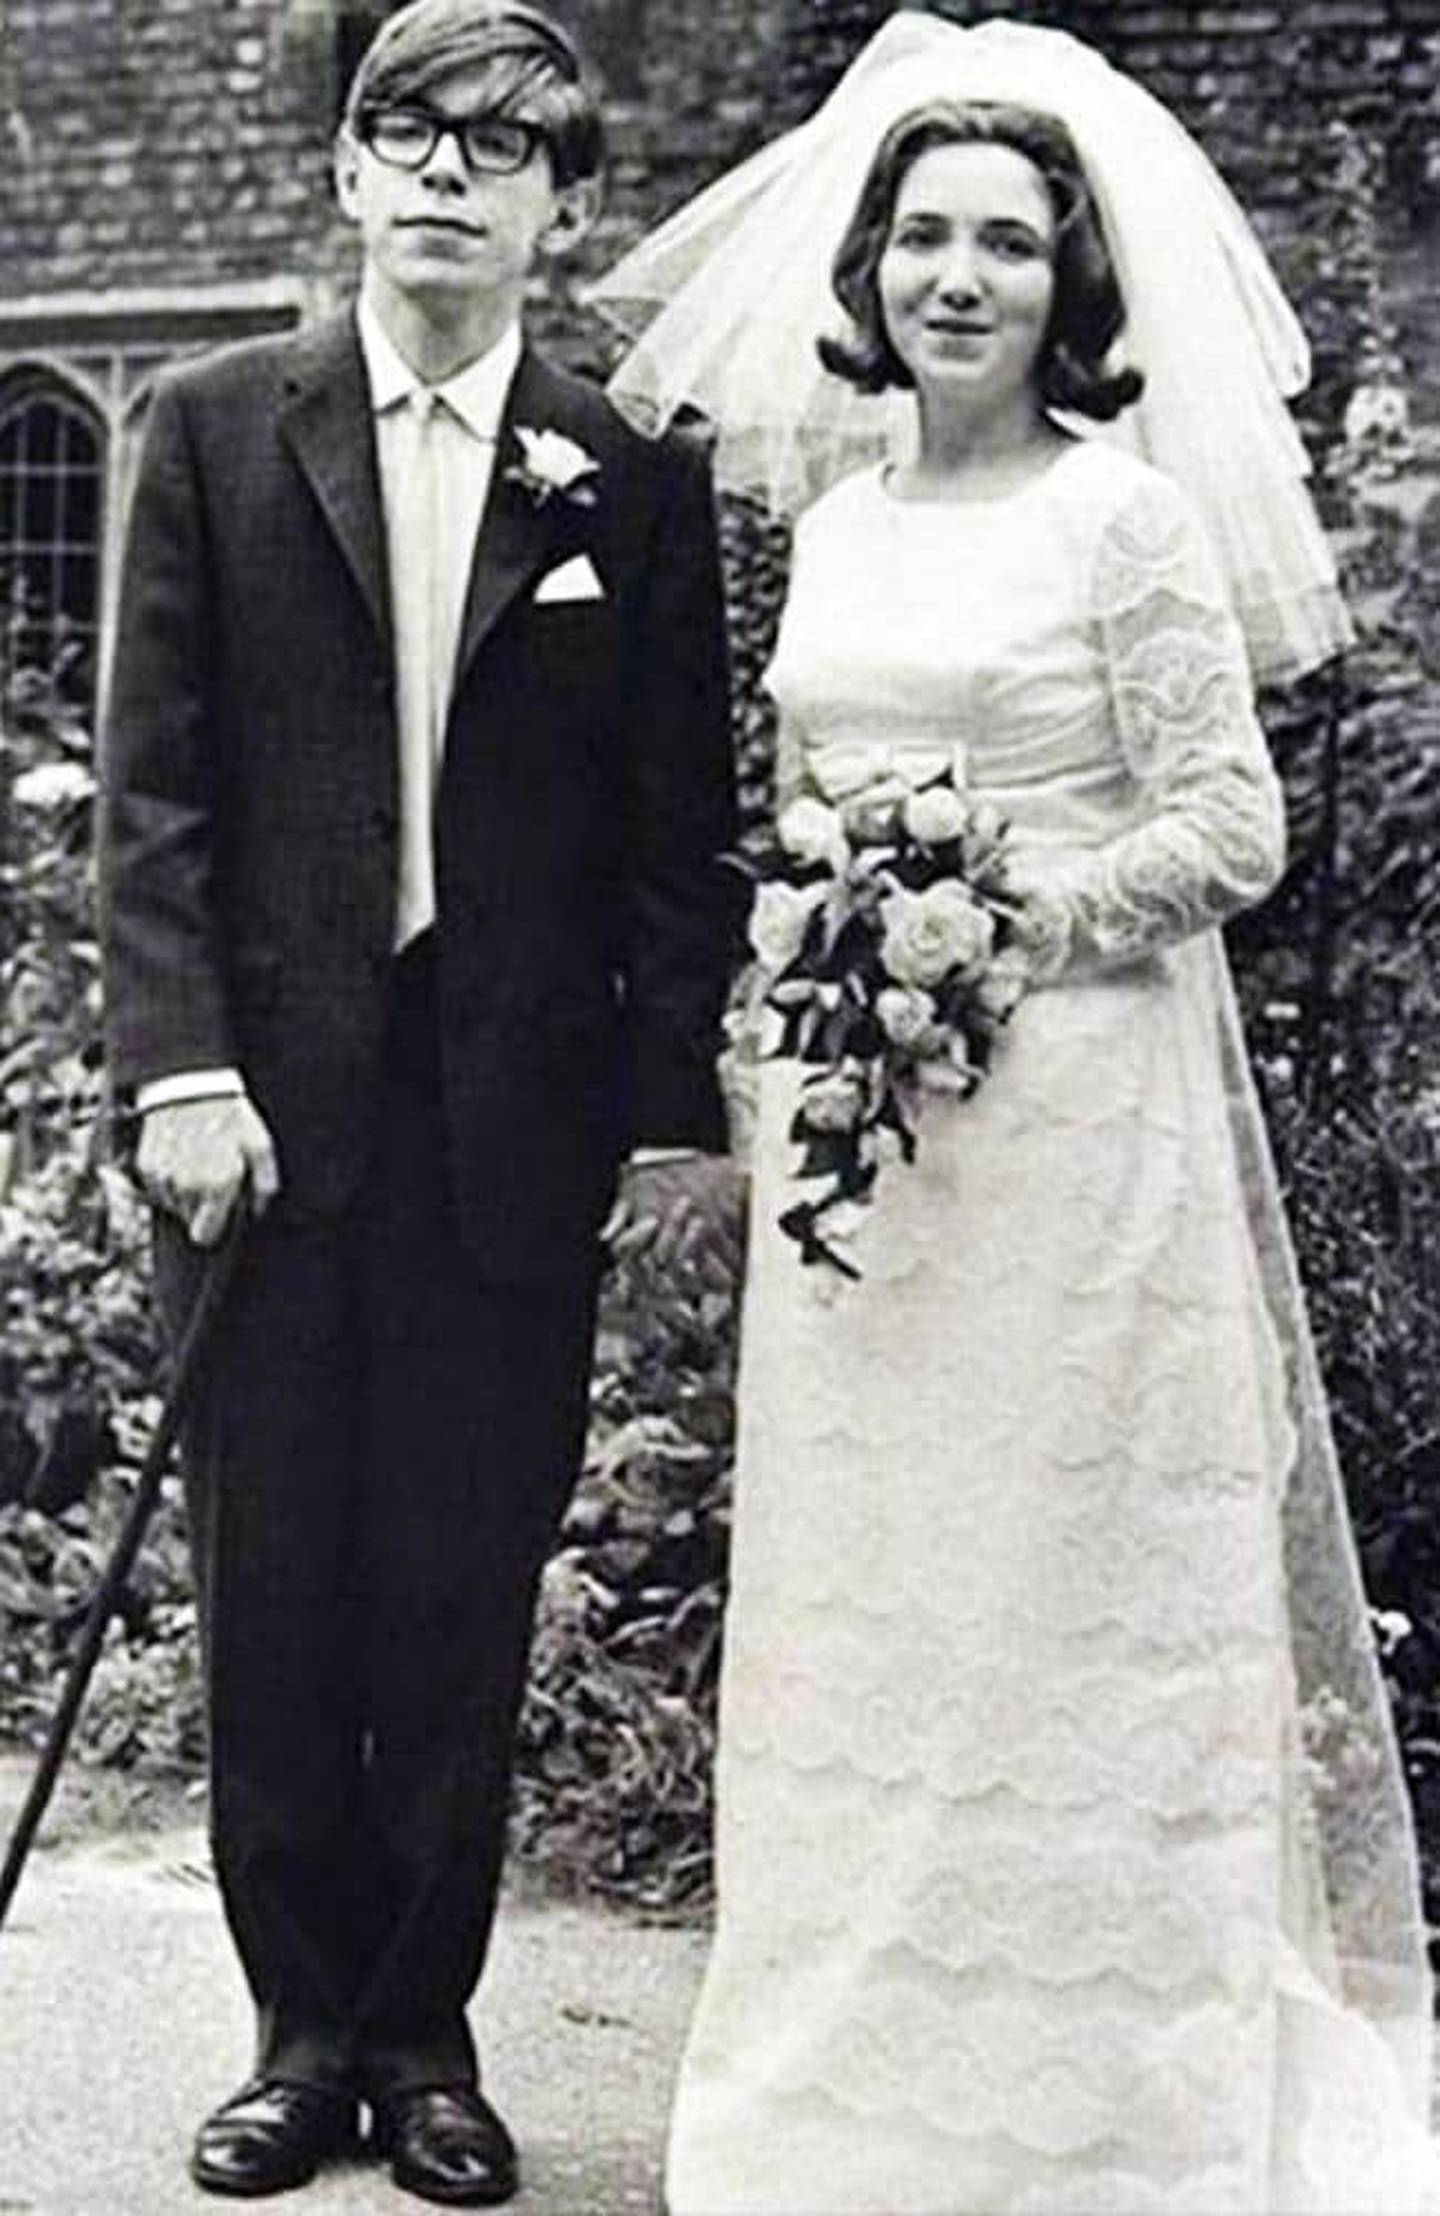 Hawking's first marriage